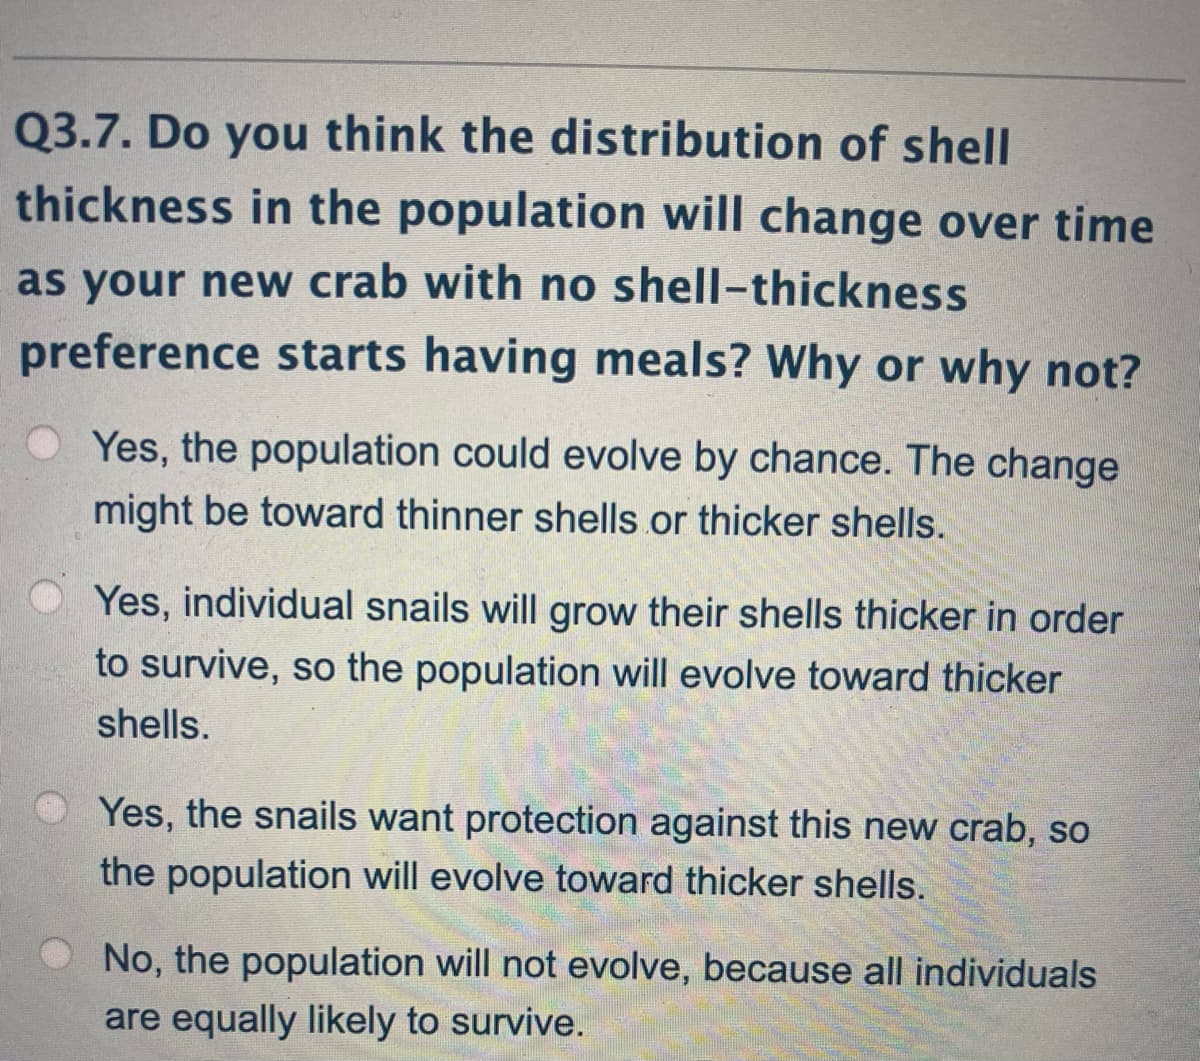 Q3.7. Do you think the distribution of shell
thickness in the population will change over time
as your new crab with no shell-thickness
preference starts having meals? Why or why not?
O Yes, the population could evolve by chance. The change
might be toward thinner shells.or thicker shells.
Yes, individual snails will grow their shells thicker in order
to survive, so the population will evolve toward thicker
shells.
O Yes, the snails want protection against this new crab, so
the population will evolve toward thicker shells.
No, the population will not evolve, because all individuals
are equally likely to survive.
